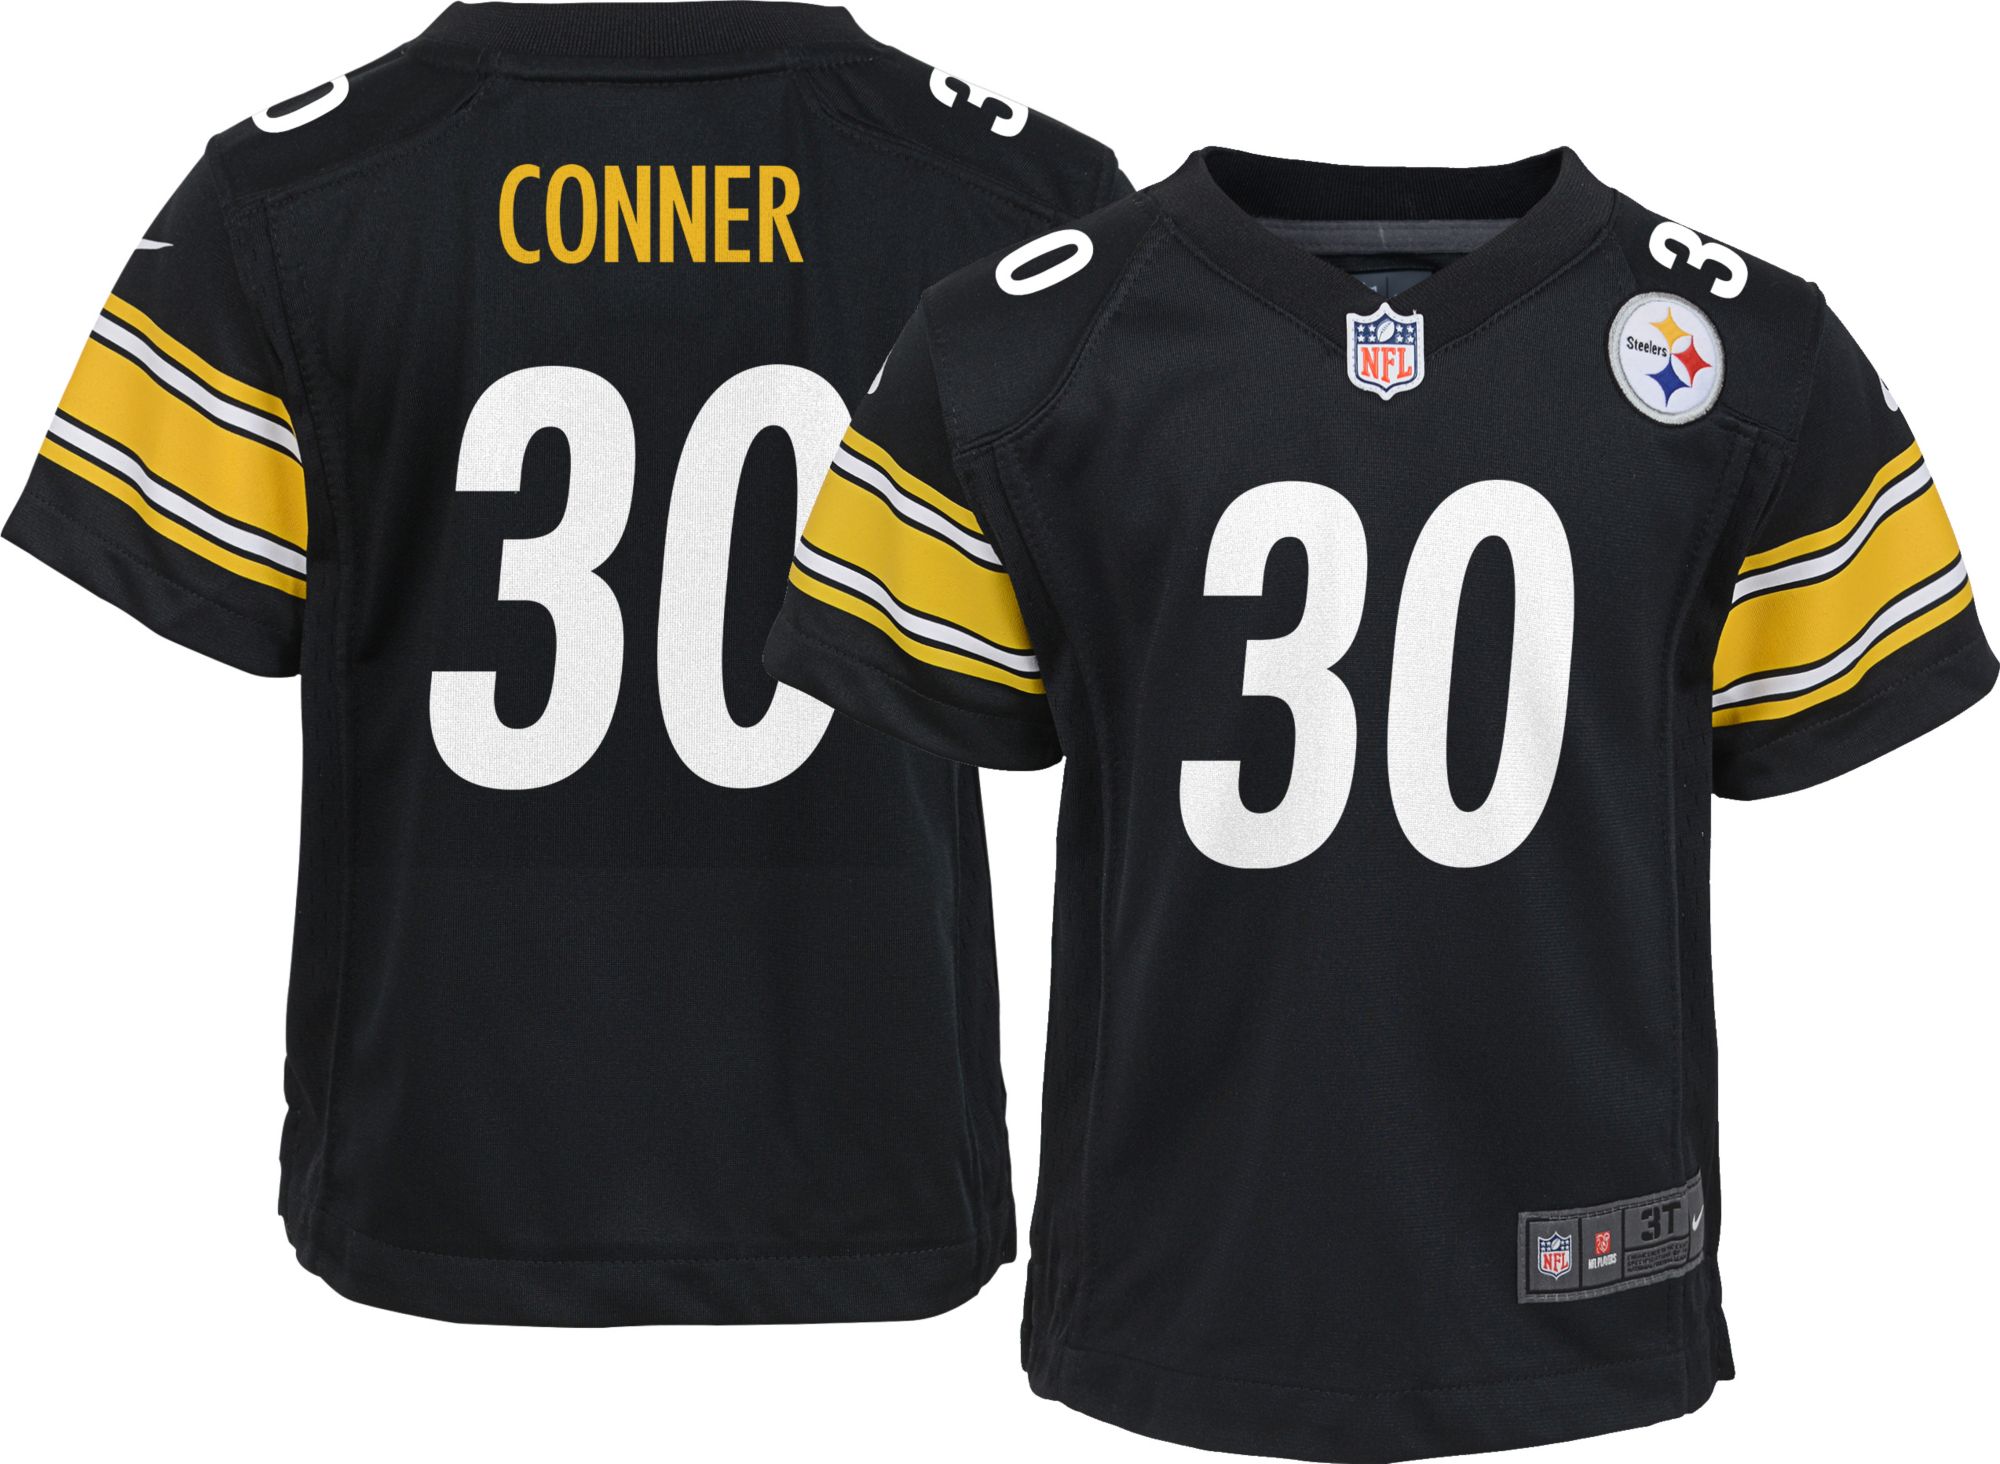 james conner youth jersey